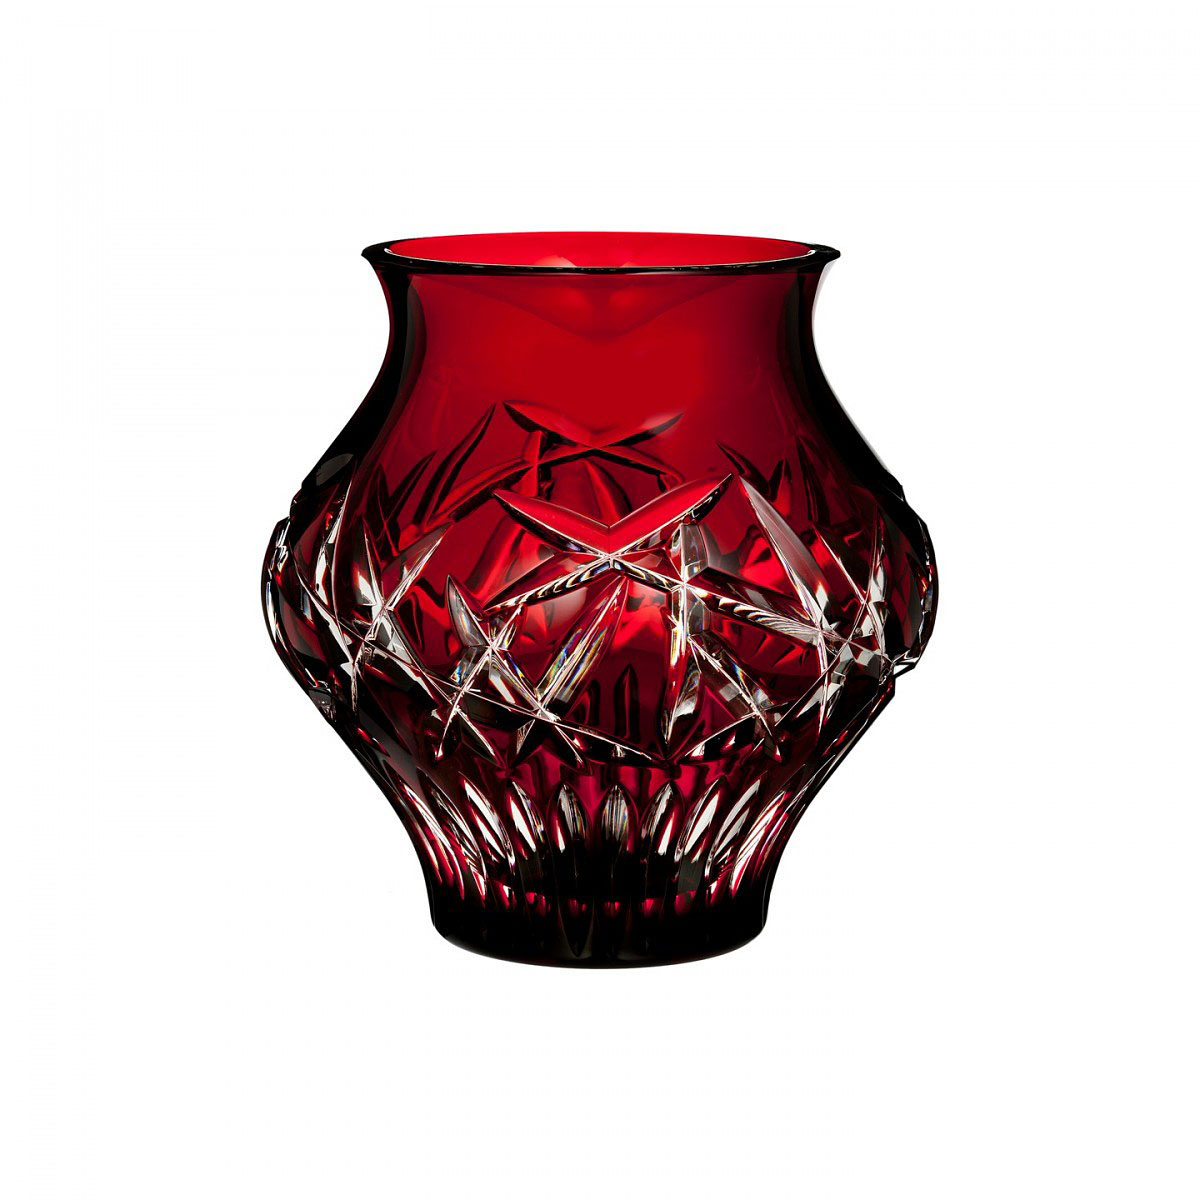 Waterford Crystal, Jeff Leatham Fleurology Cleo 8" Cachepot, Ruby